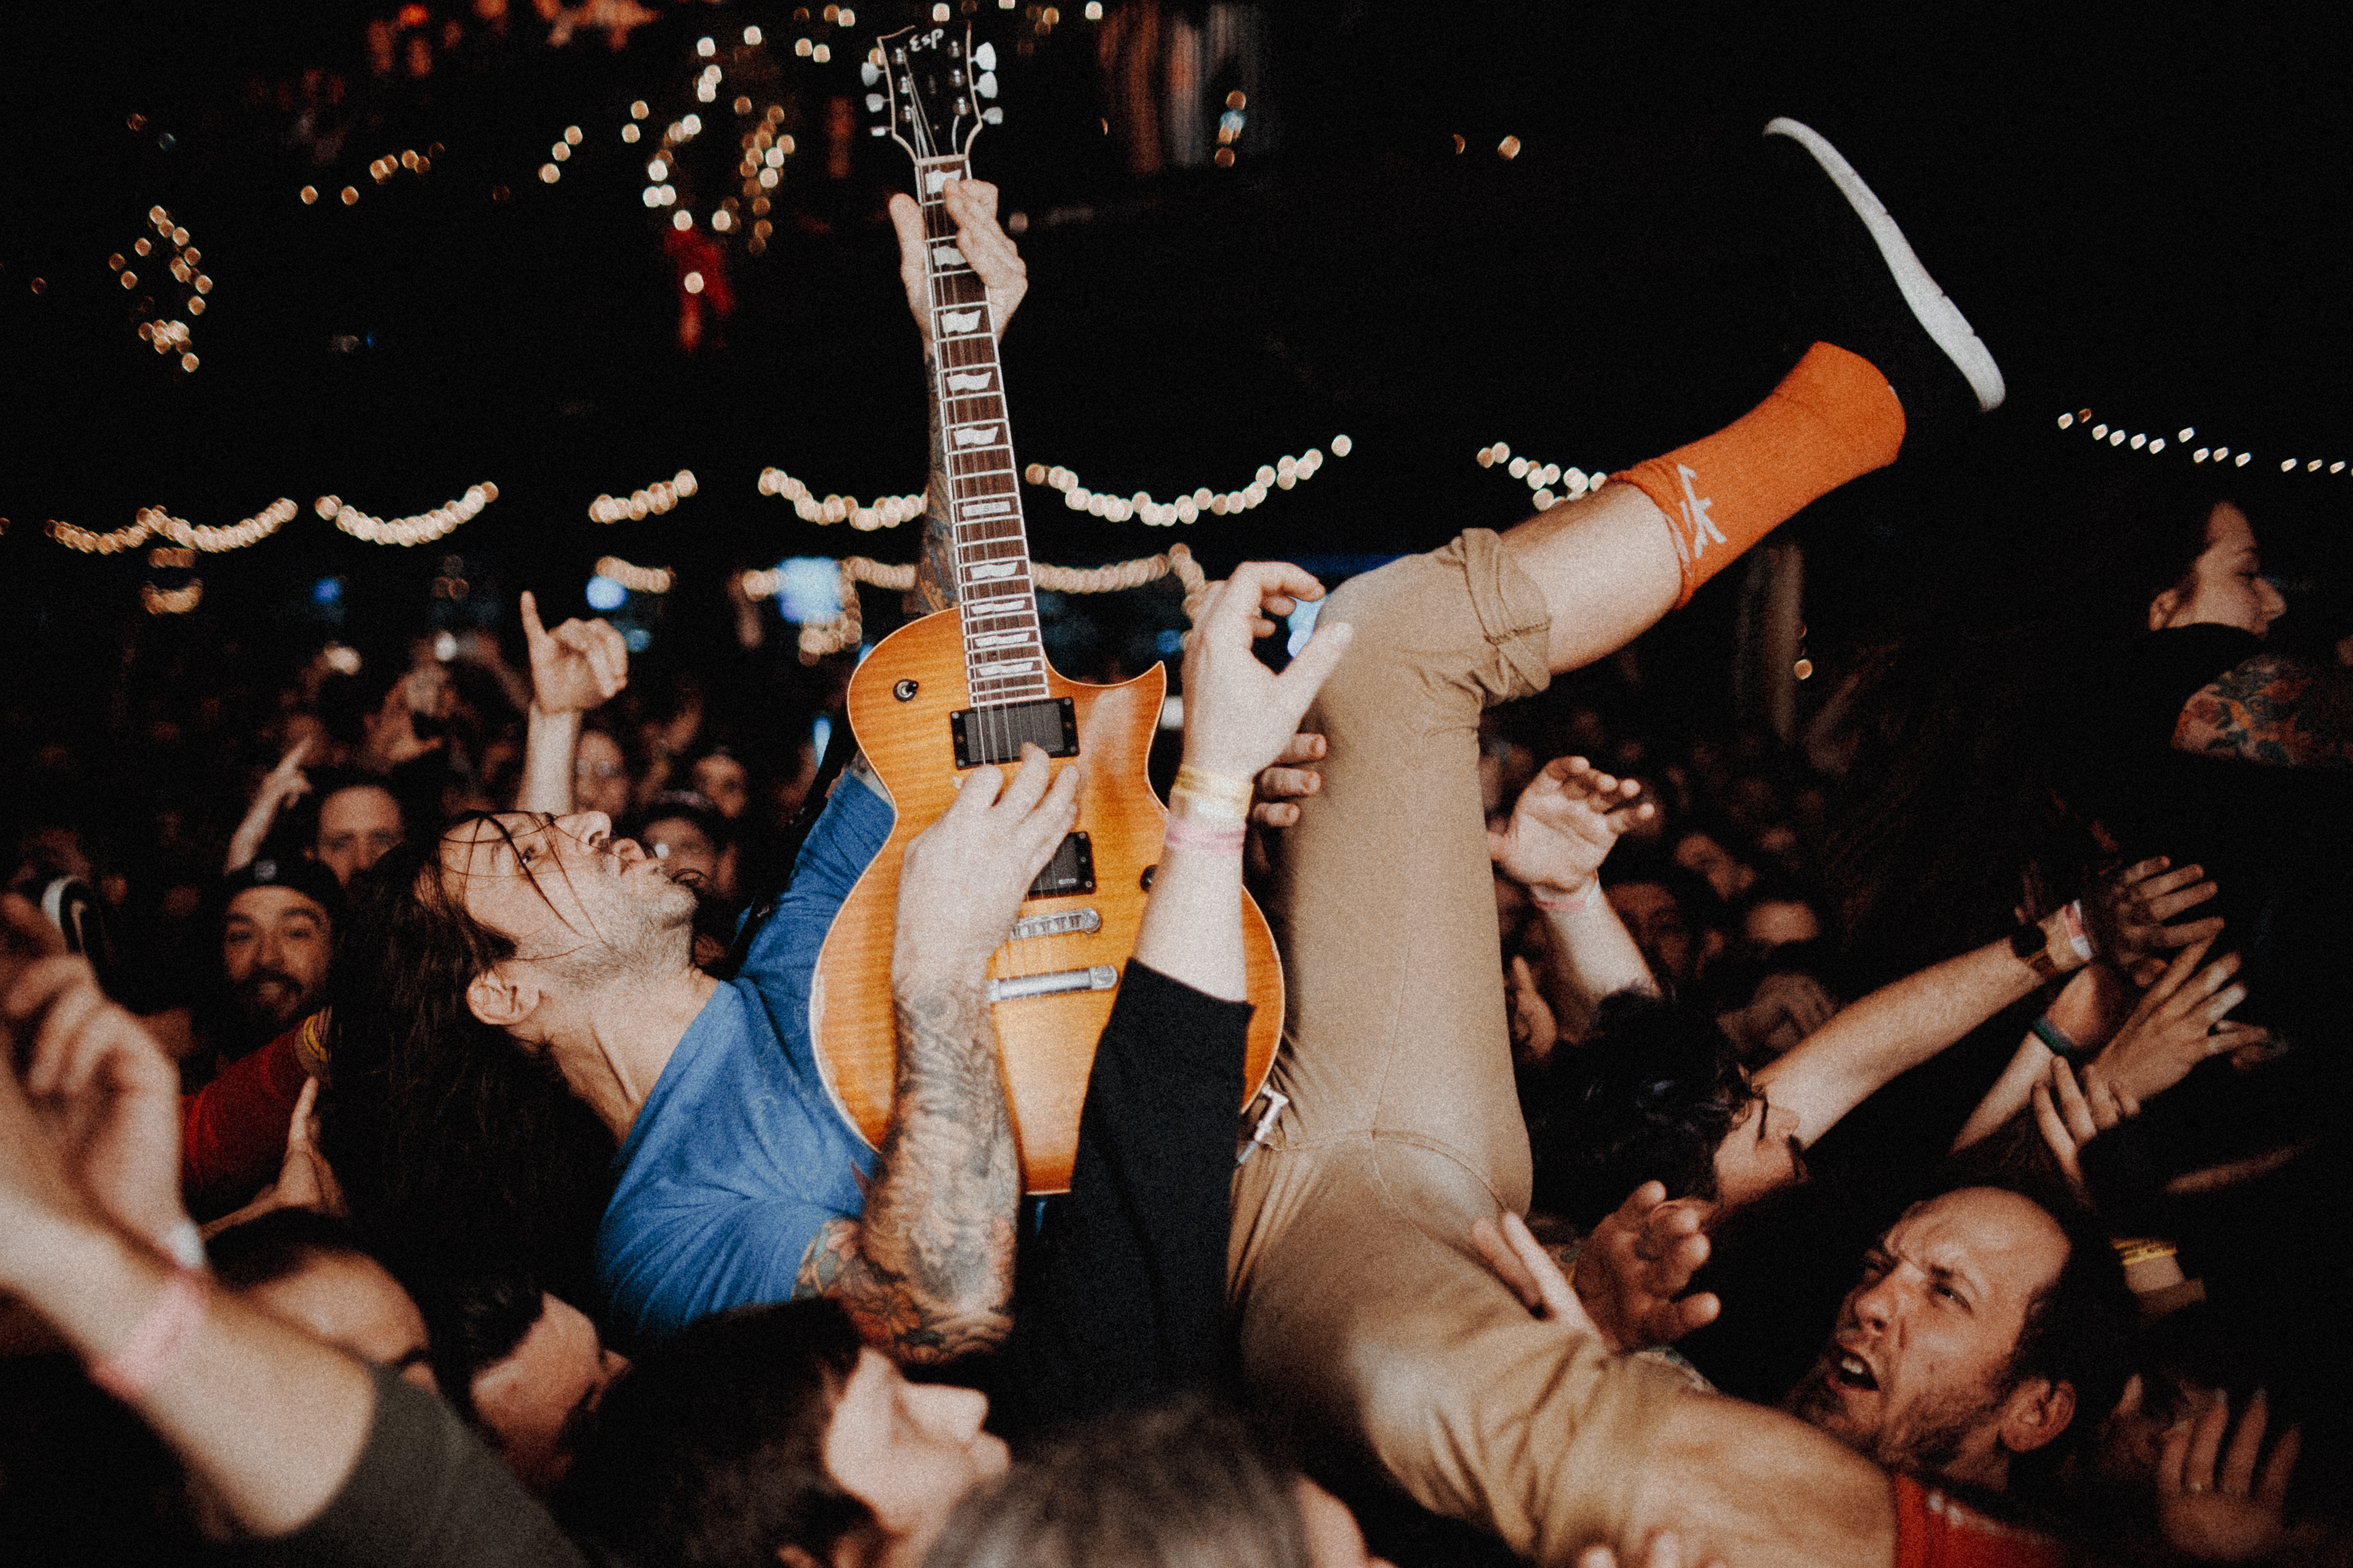 Every Time I Die’s Annual Holiday Show at Buffalo Riverworks (12/15/18)